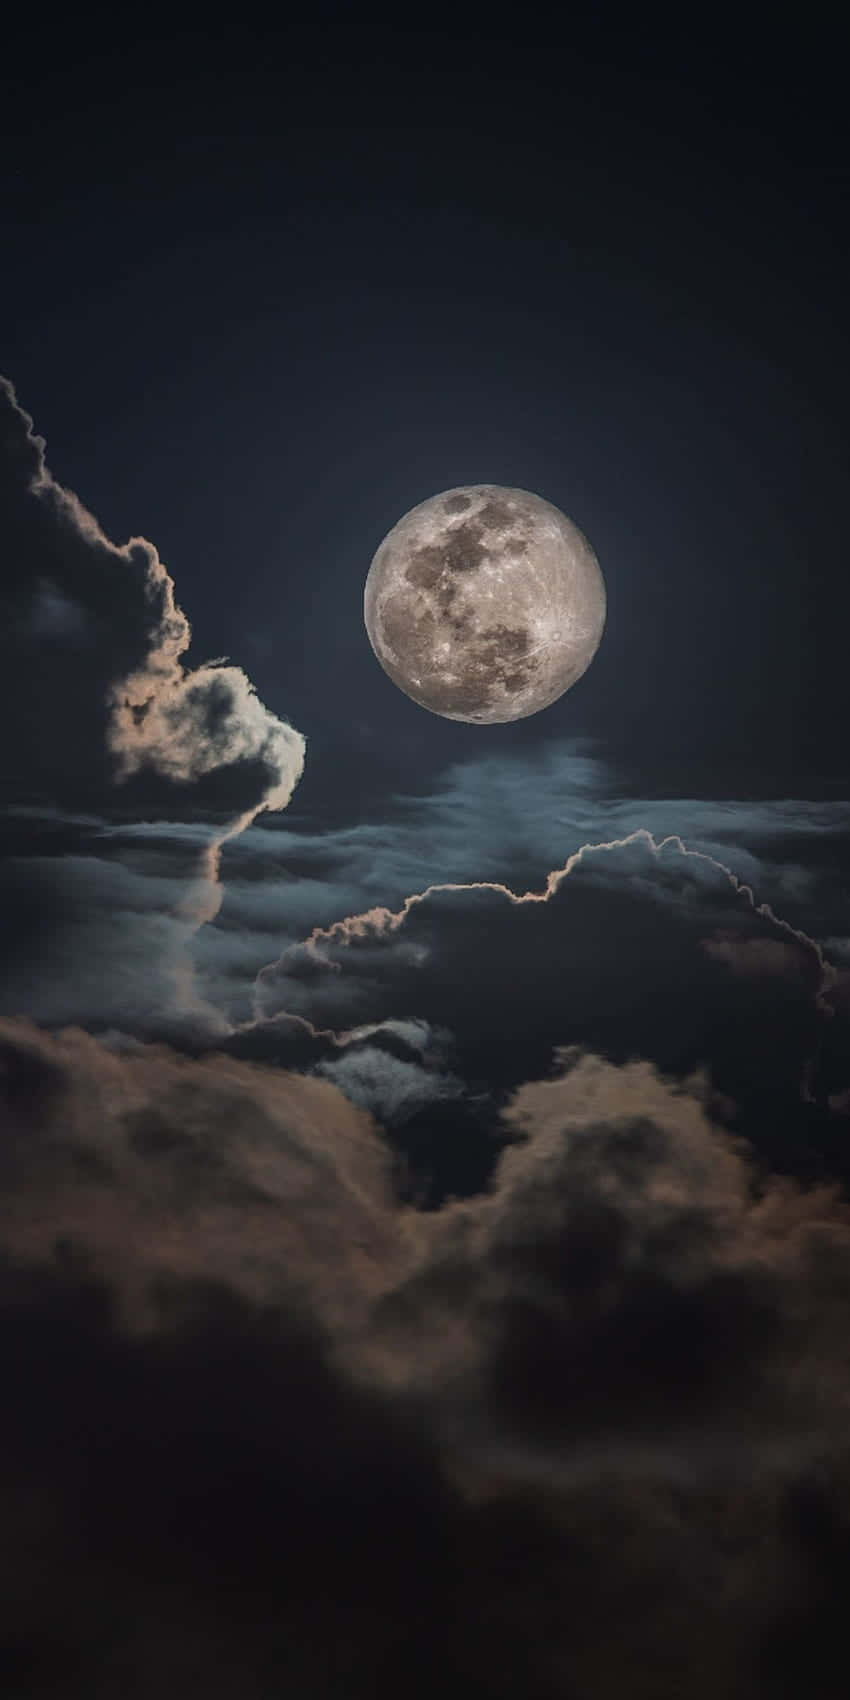 The beauty of a tranquil moonlit night". Wallpaper